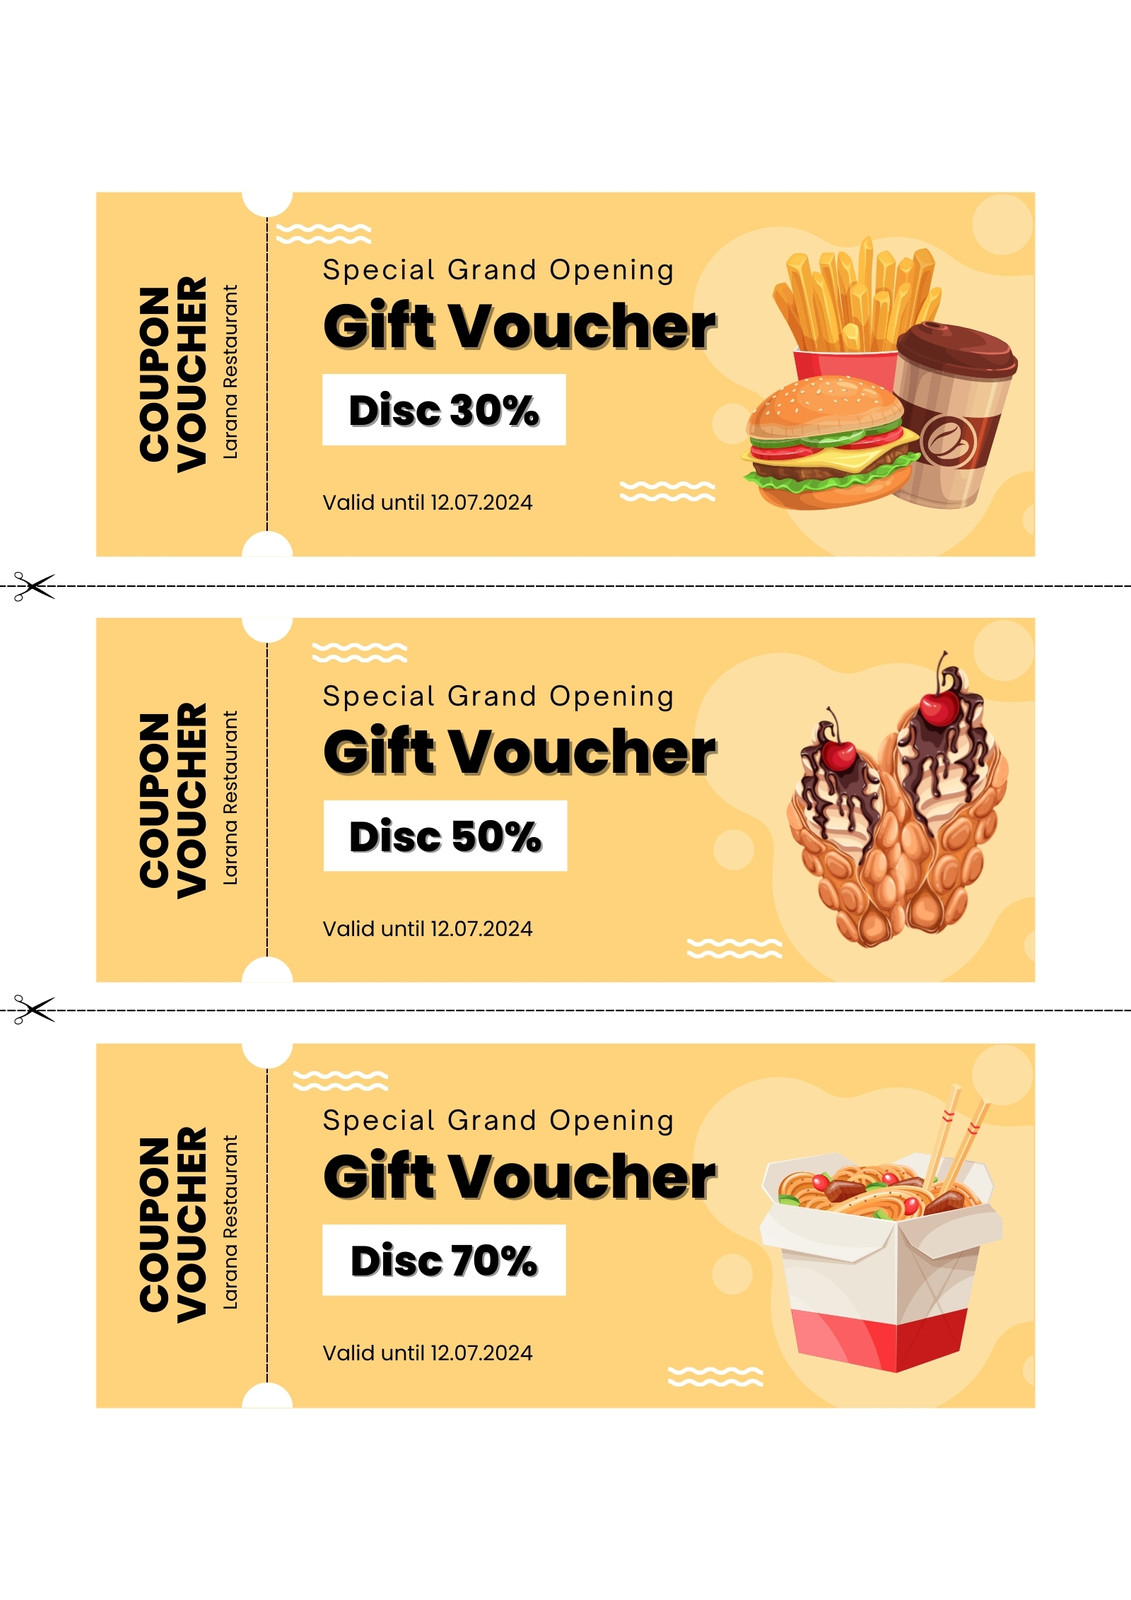 Today's Top Restaurant Coupons